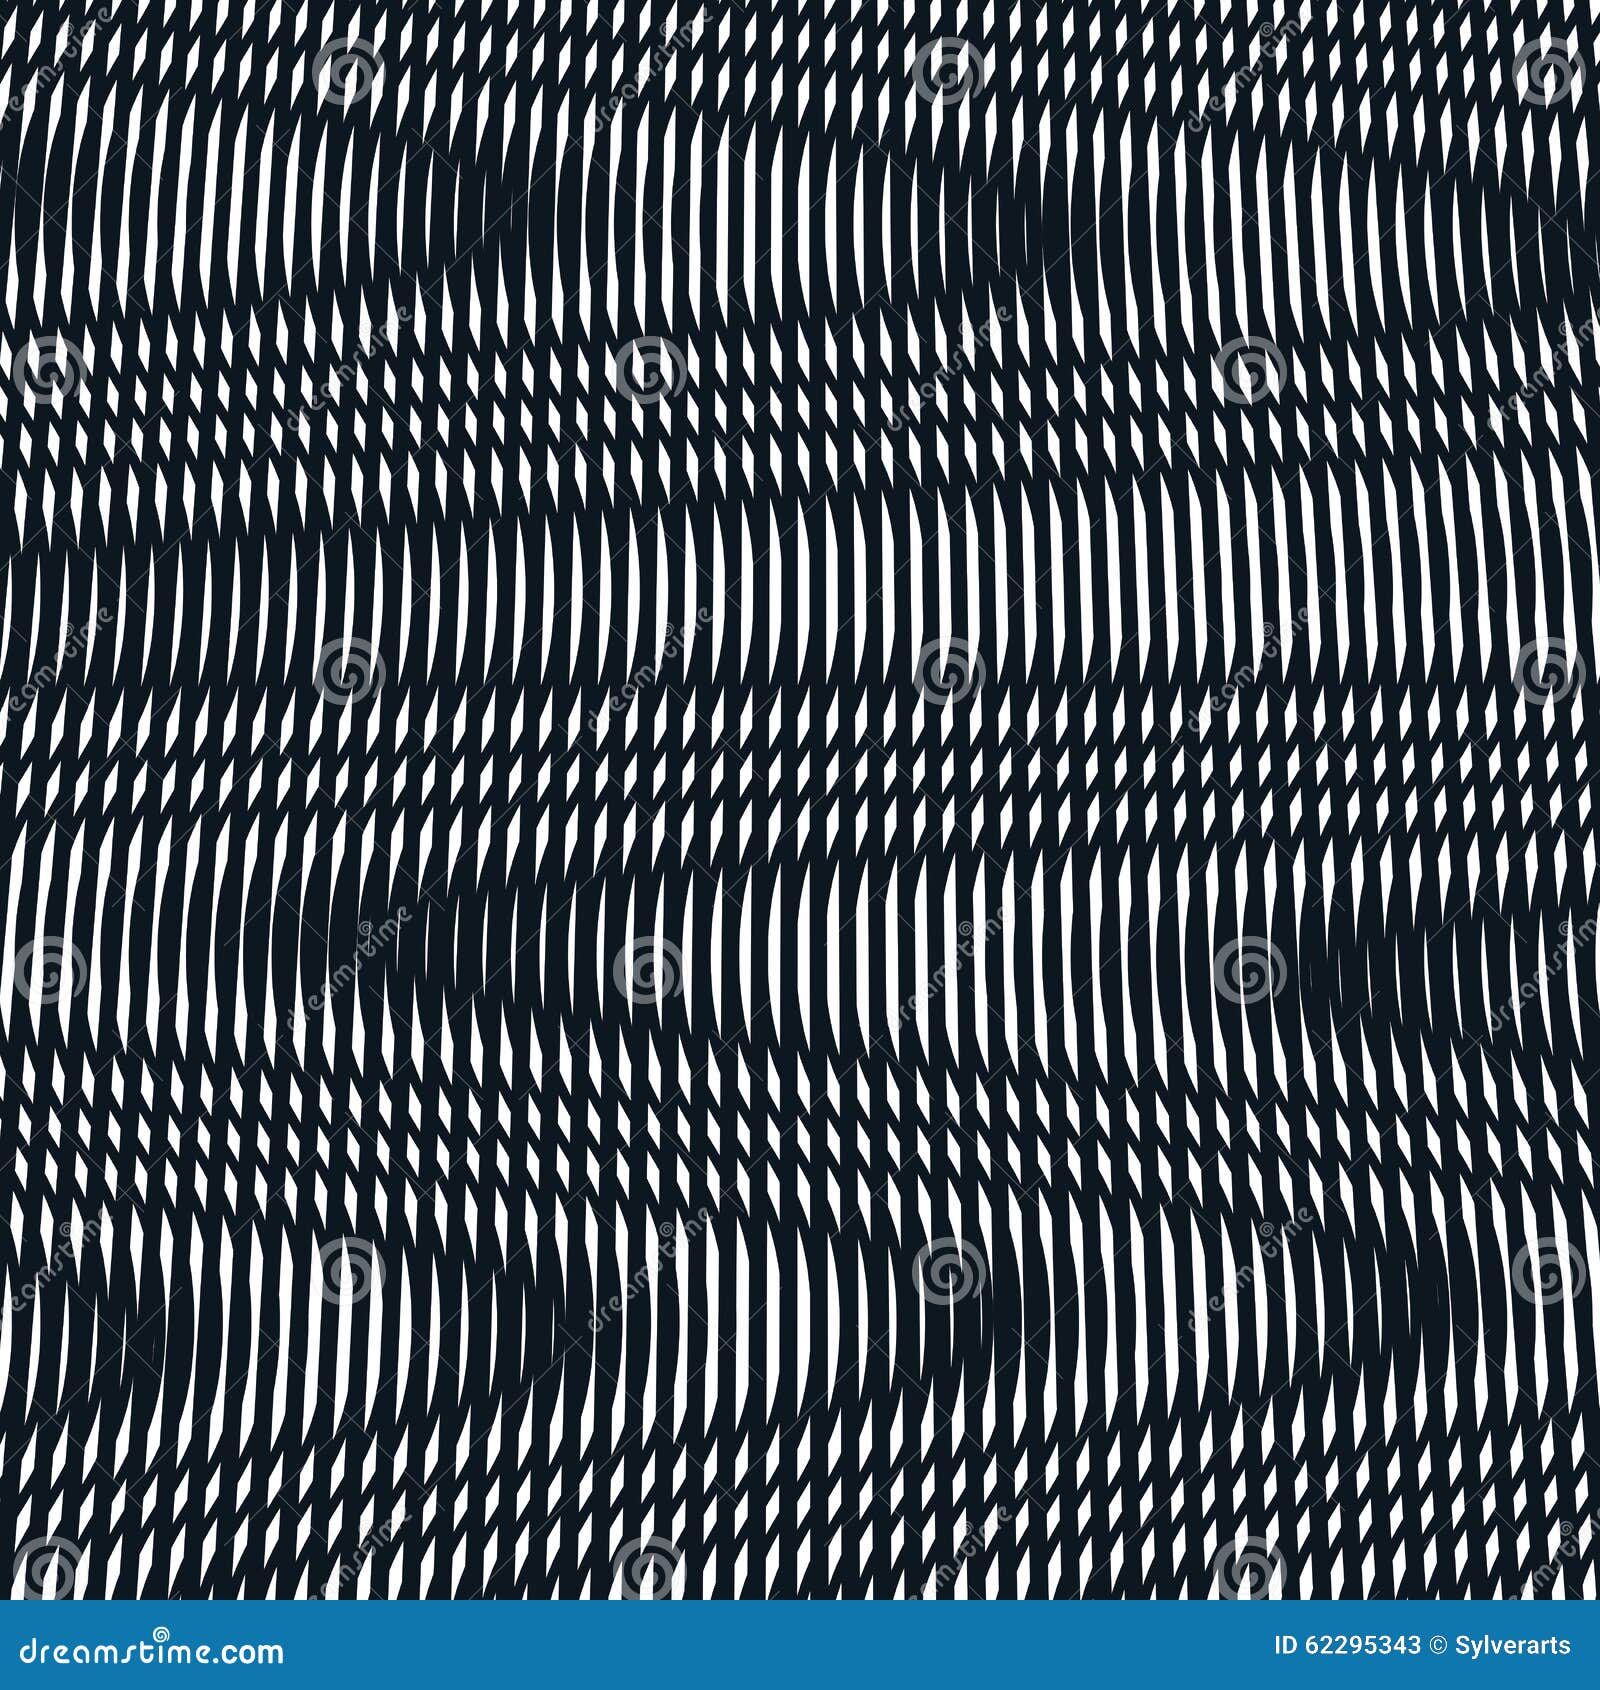 optical background with monochrome geometric lines. moire pattern